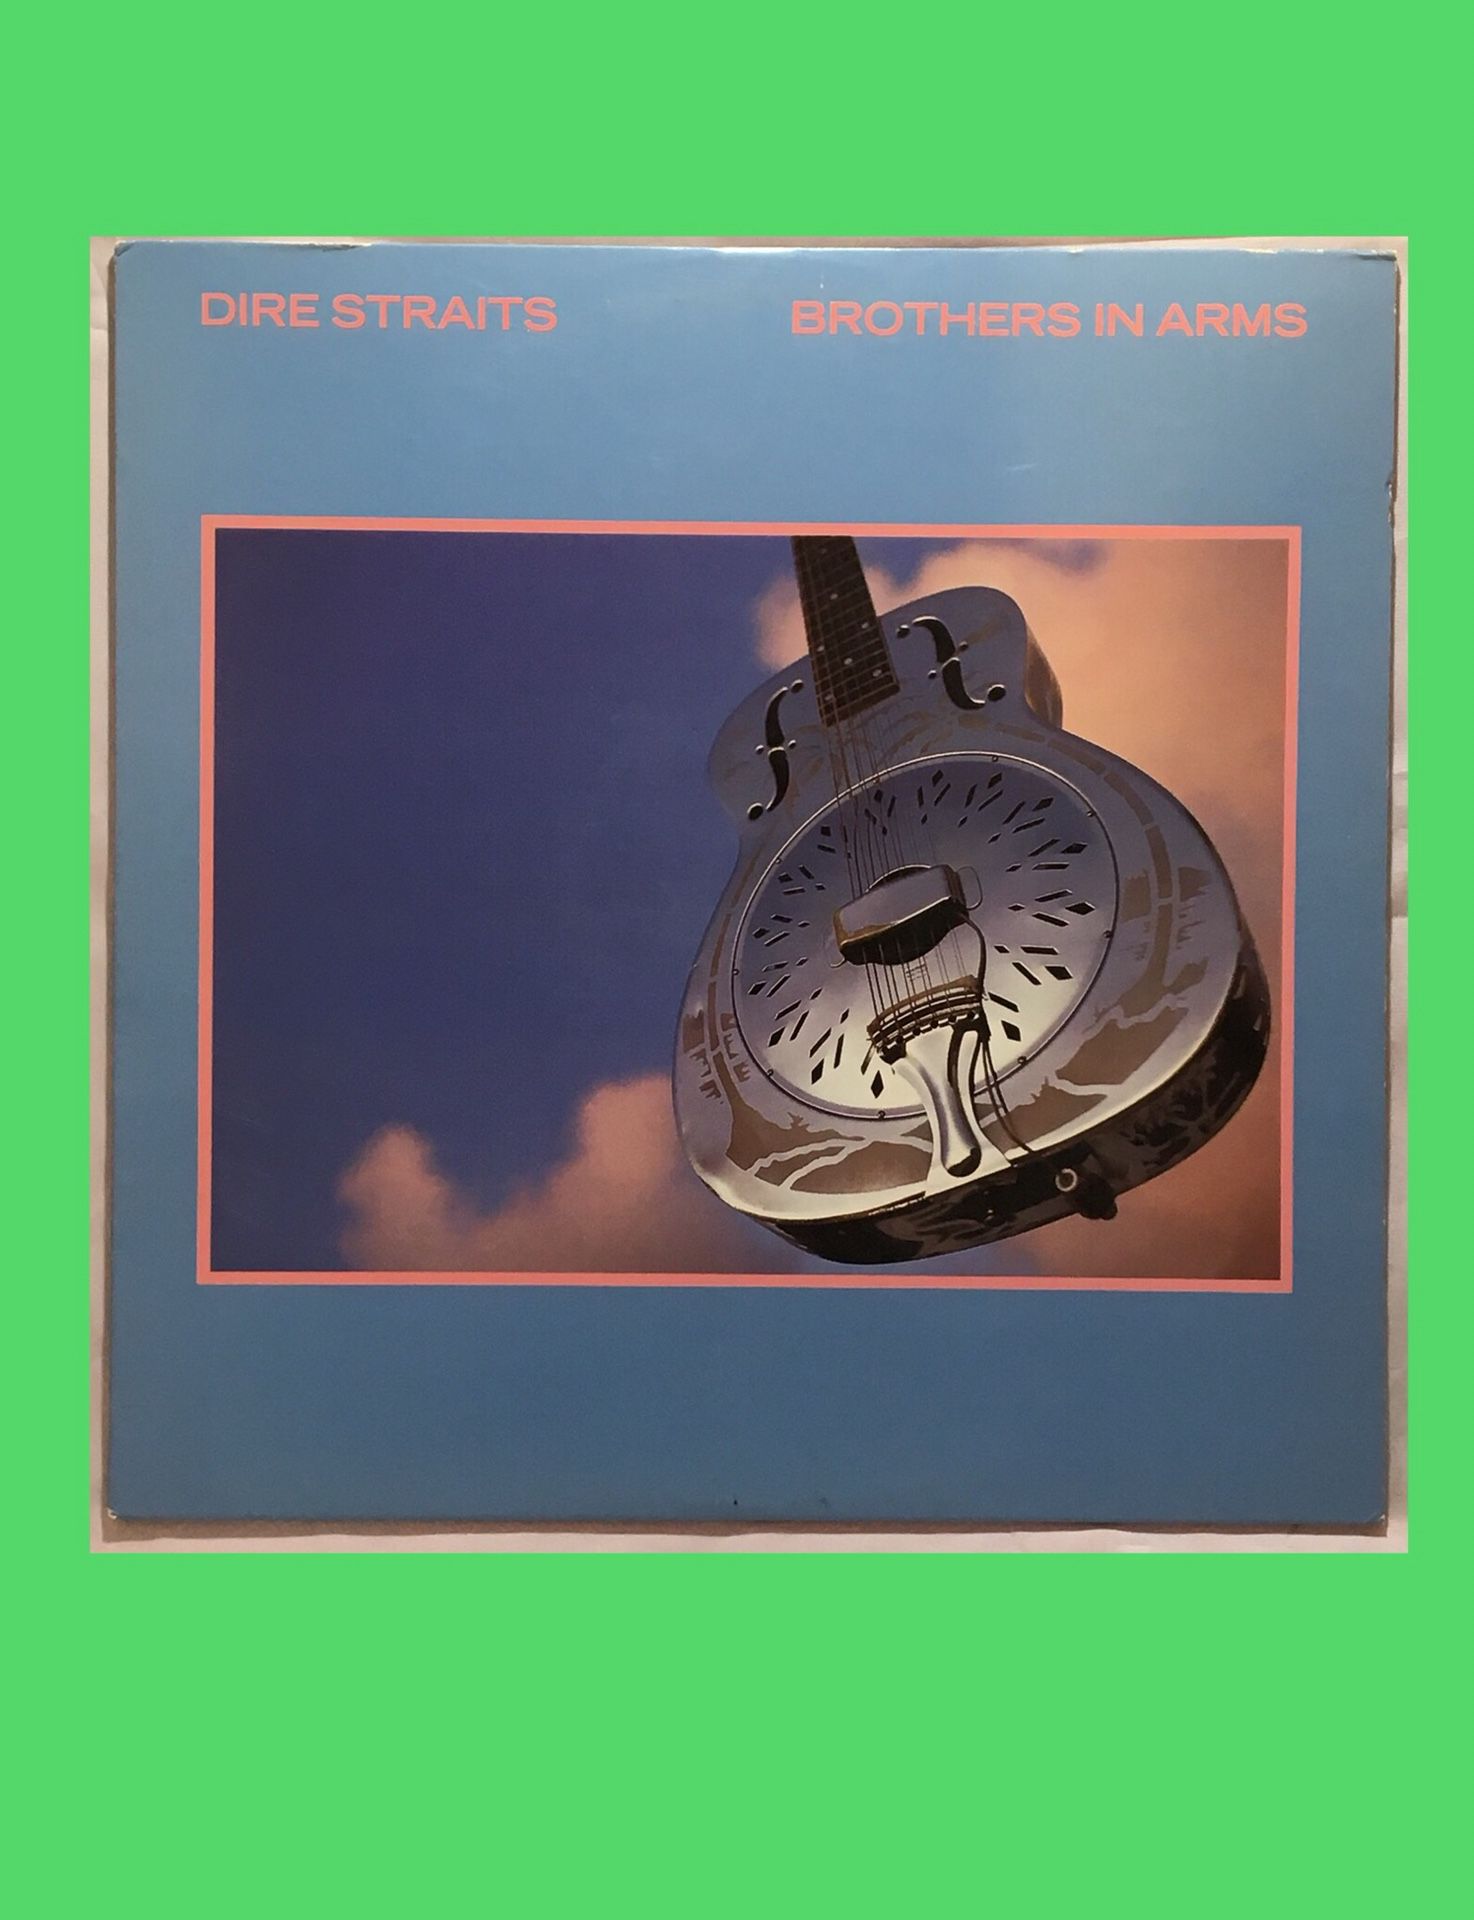 Dire Straits Brothers in Arms vinyl LP record album #ClassicRock #GuitarRock #BLM #RBG #MoneyForNothing